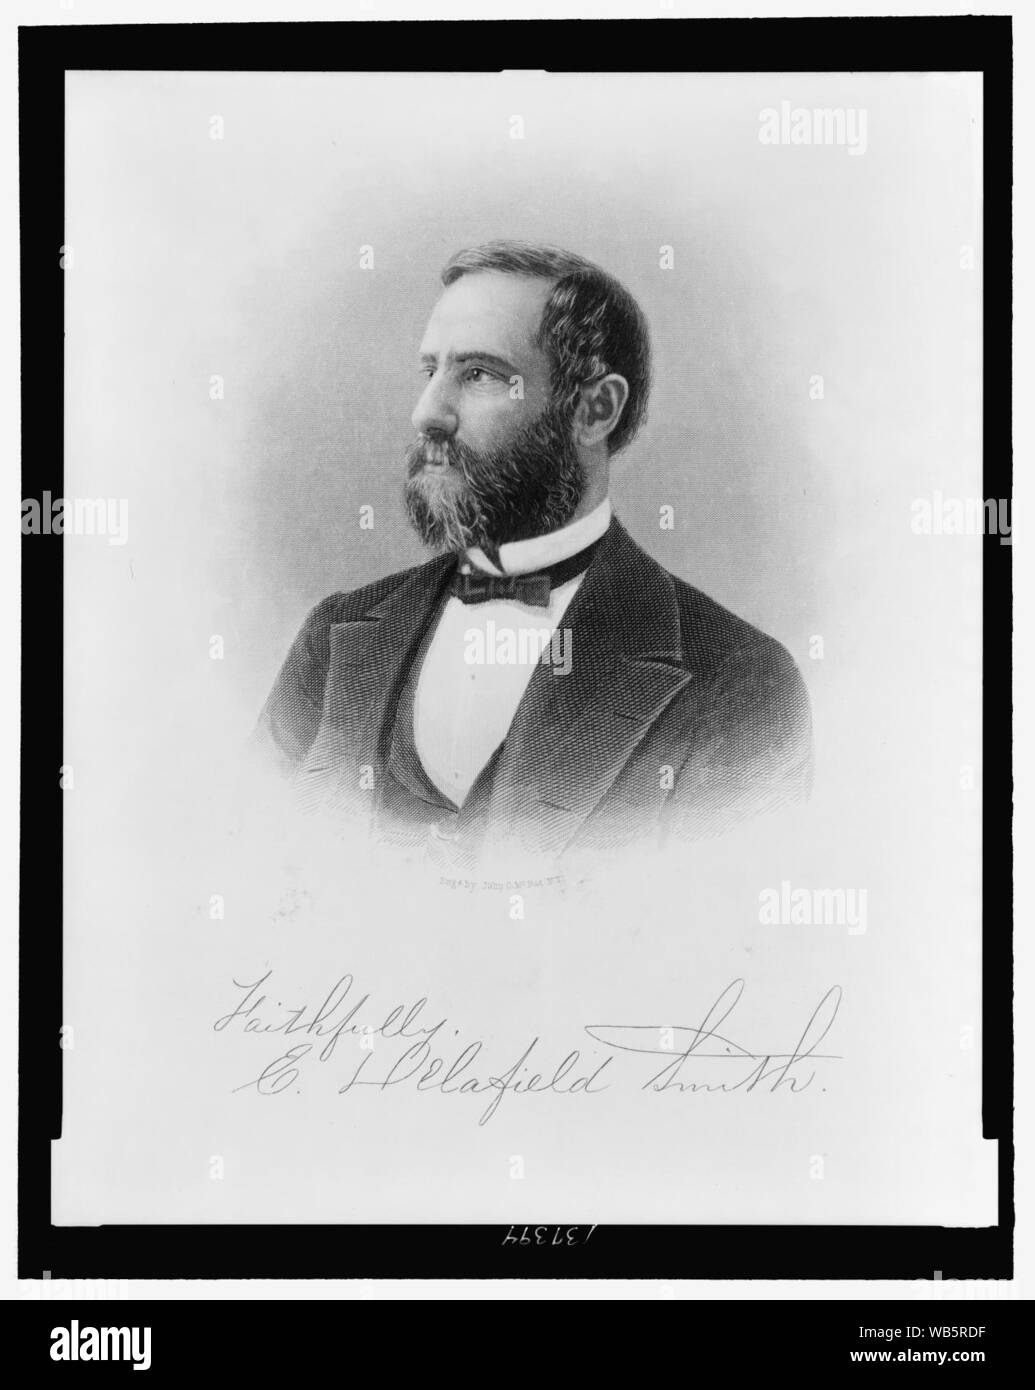 E. Delafield Smith, head-and-shoulders portrait, facing left) - Engd by John C. McRae, N.Y Stock Photo